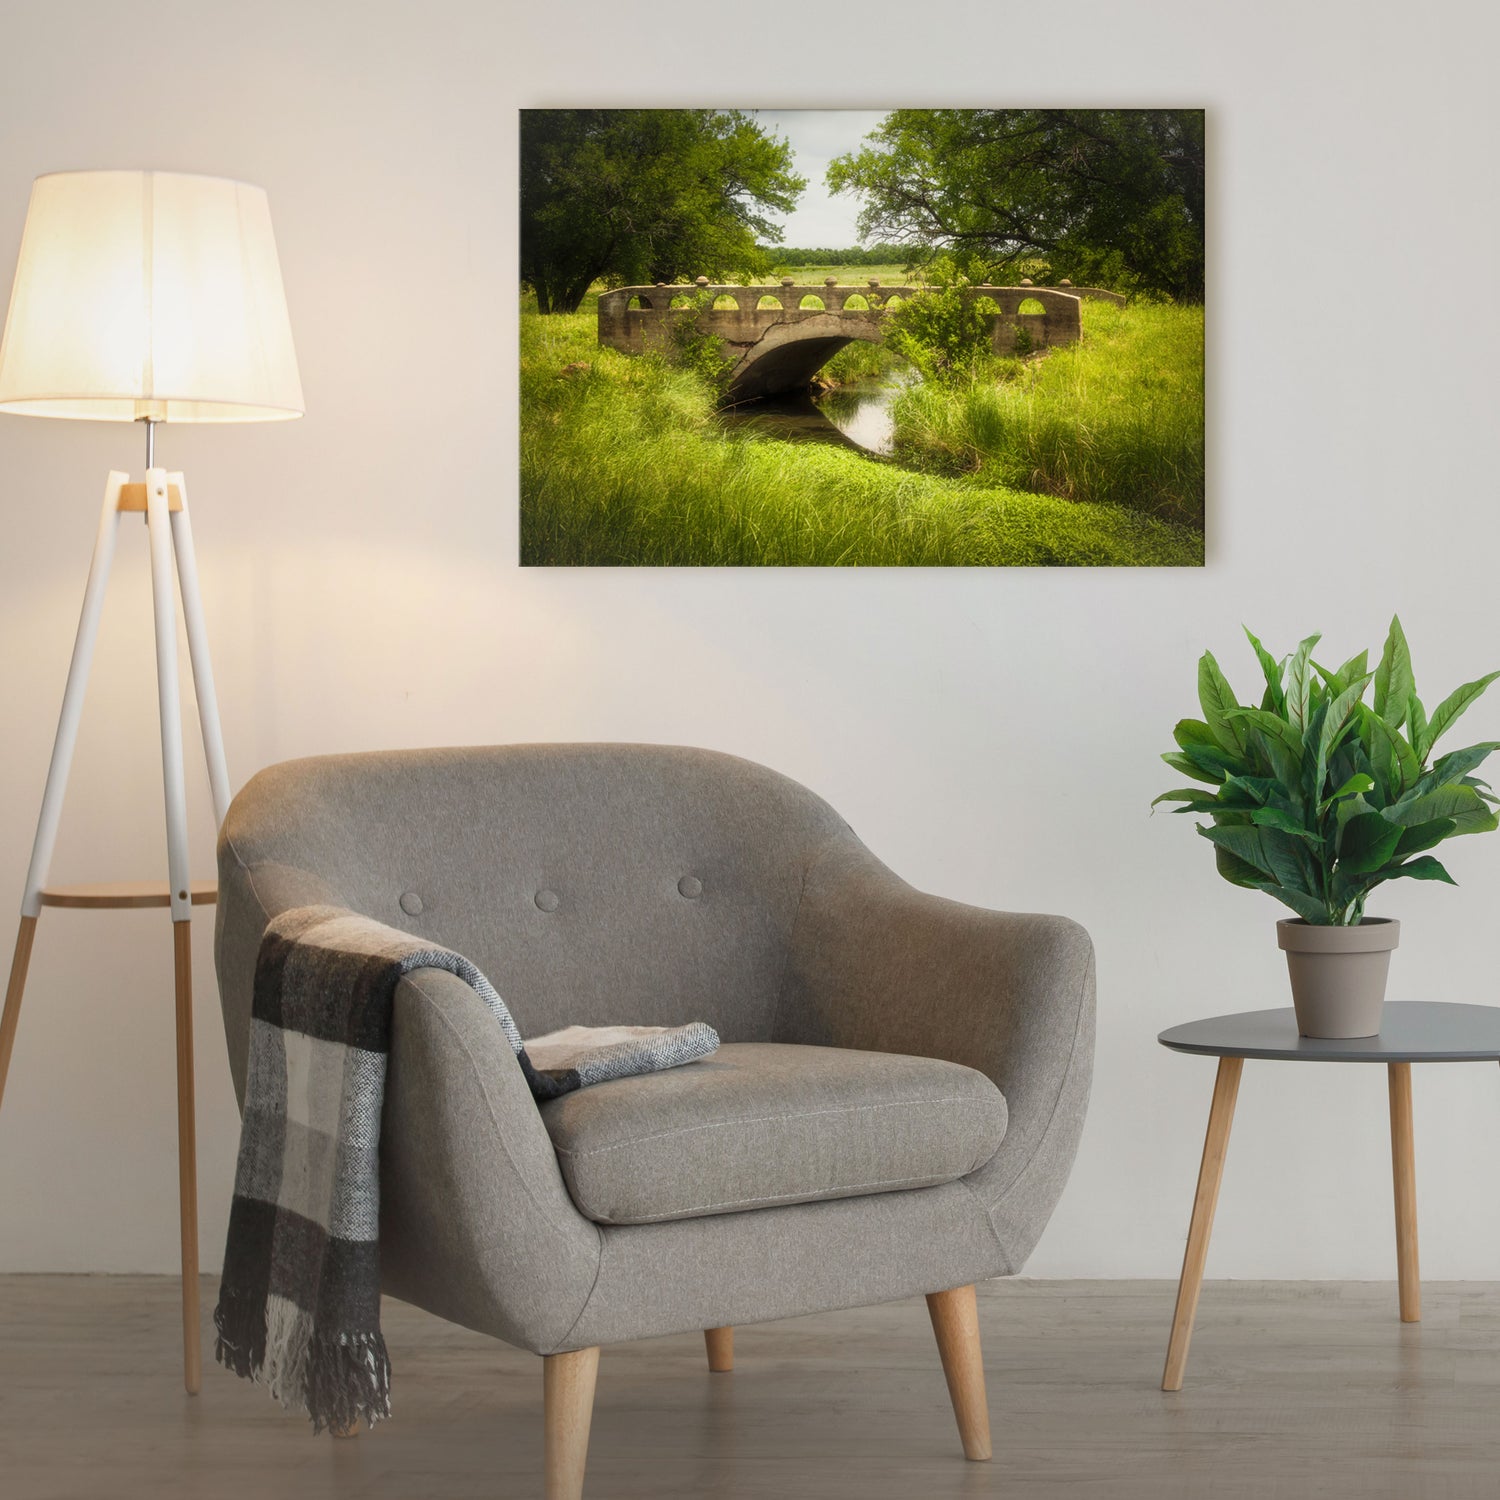 High-quality canvas print featuring a serene bridge scene, capturing the tranquil essence of Kansas's natural landscapes.